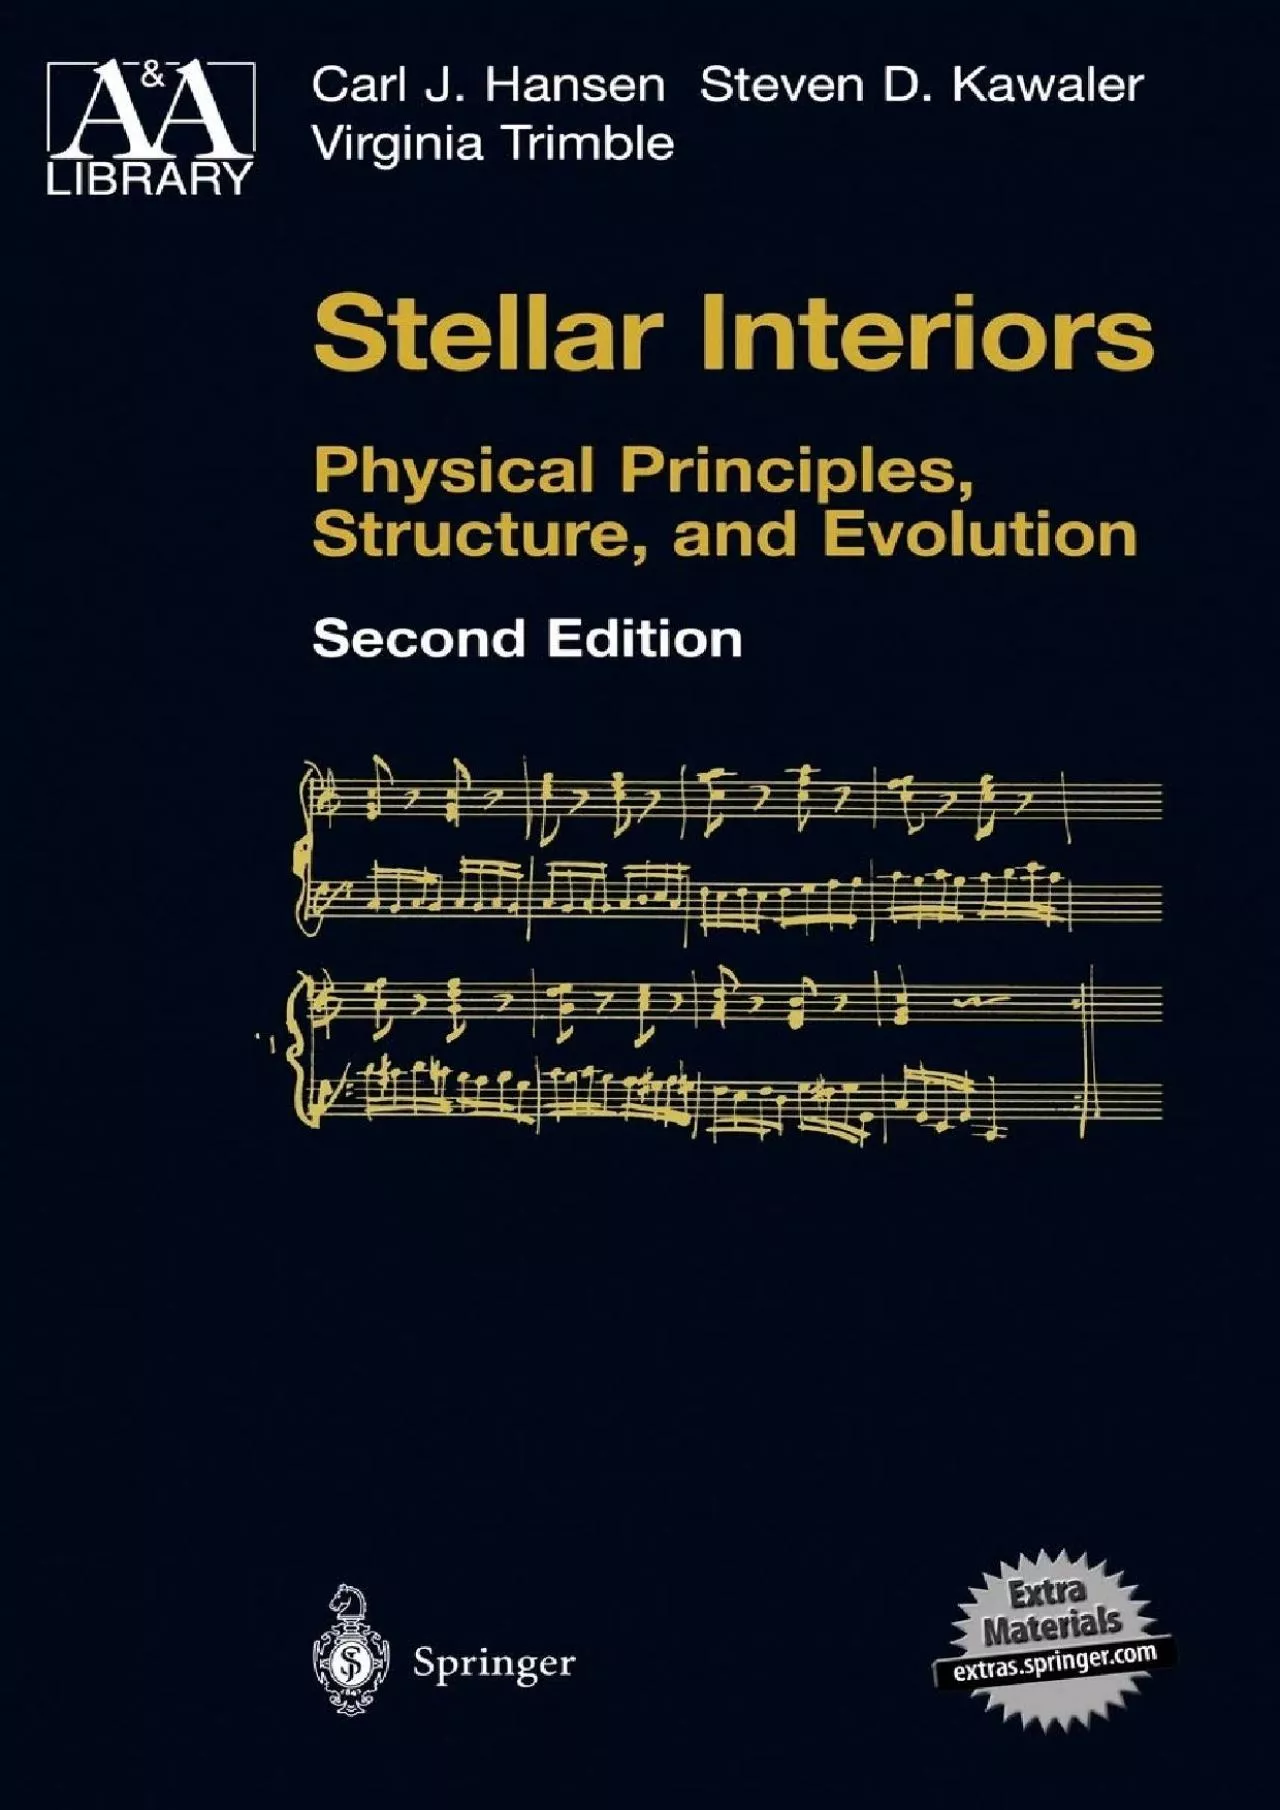 (DOWNLOAD)-Stellar Interiors - Physical Principles, Structure, and Evolution